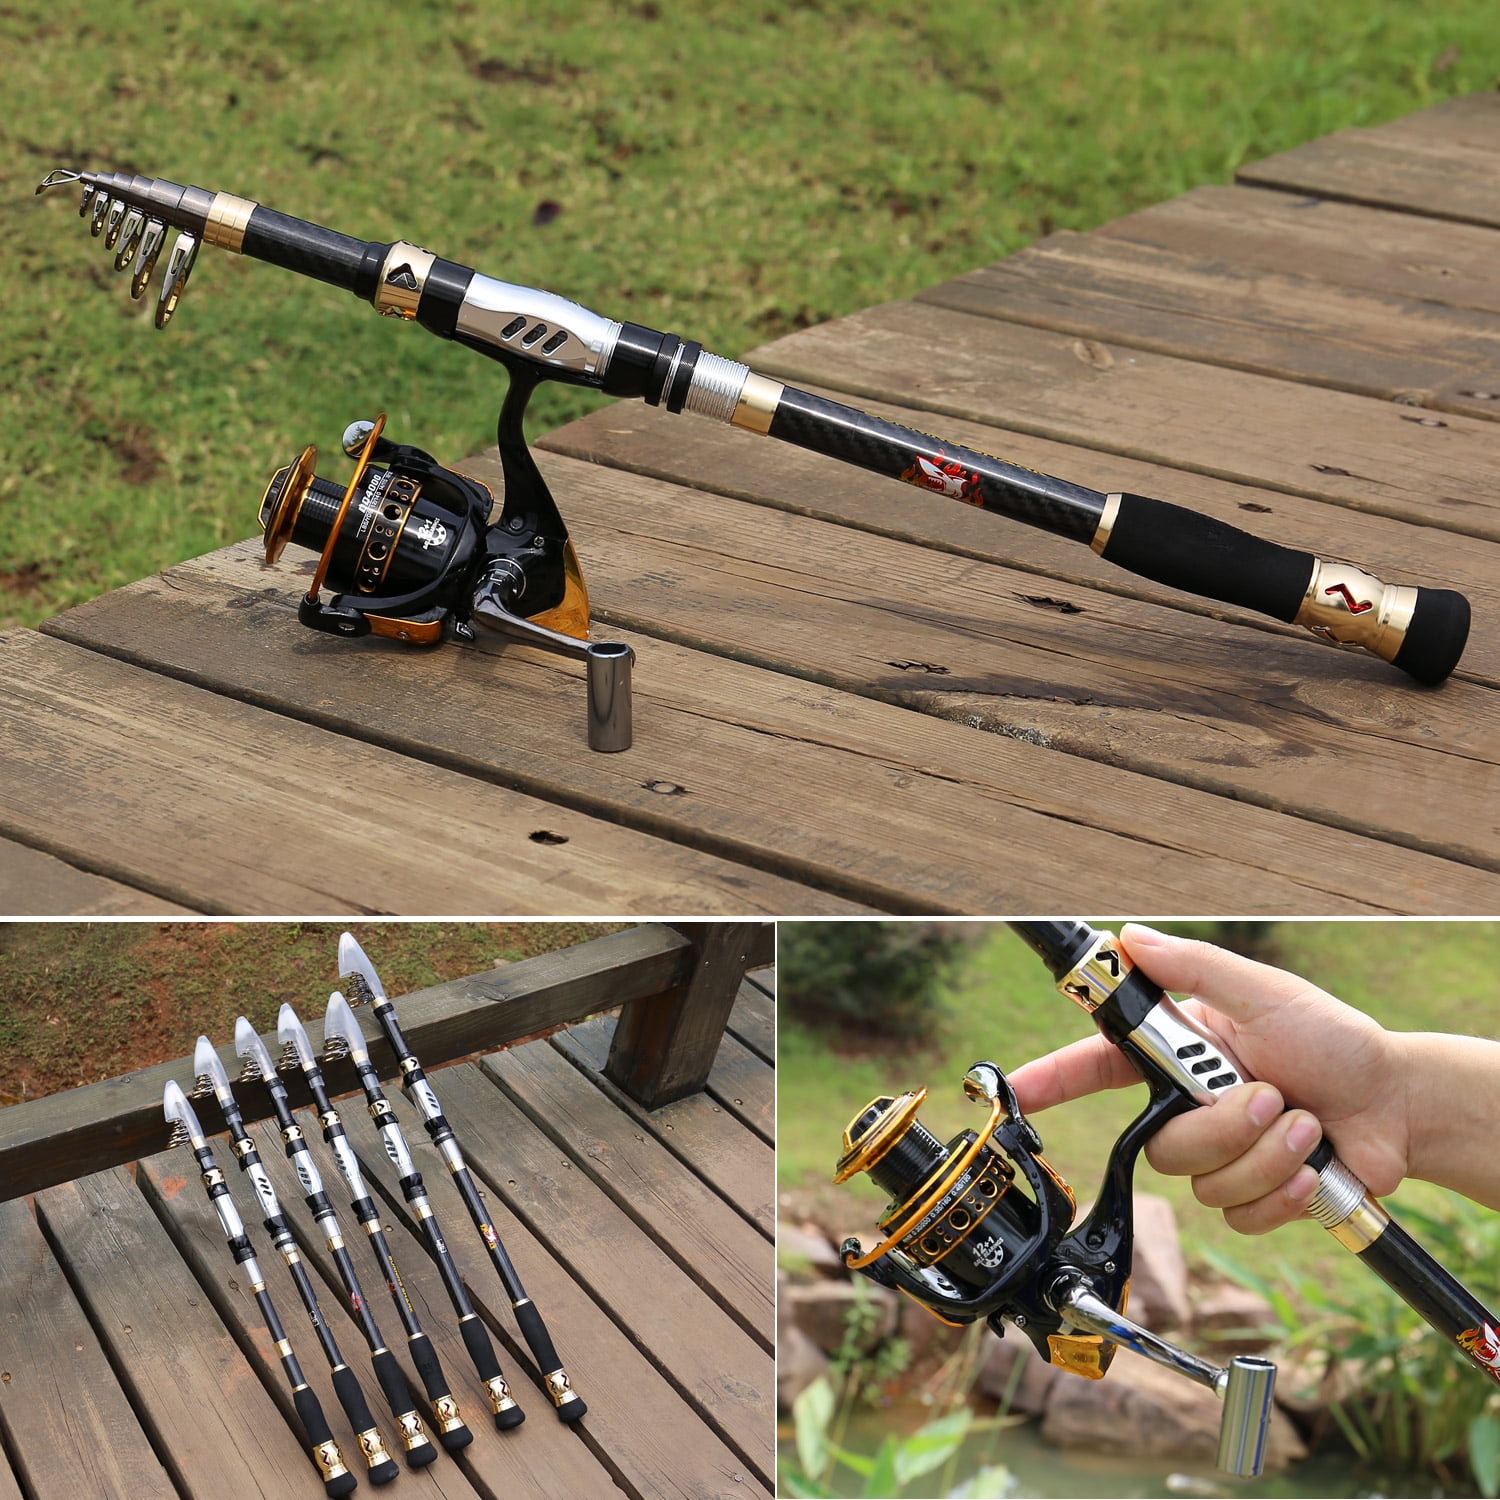 My Favorite Rod And Reel: Cabela's Fish Eagle And Shimano, 40% OFF